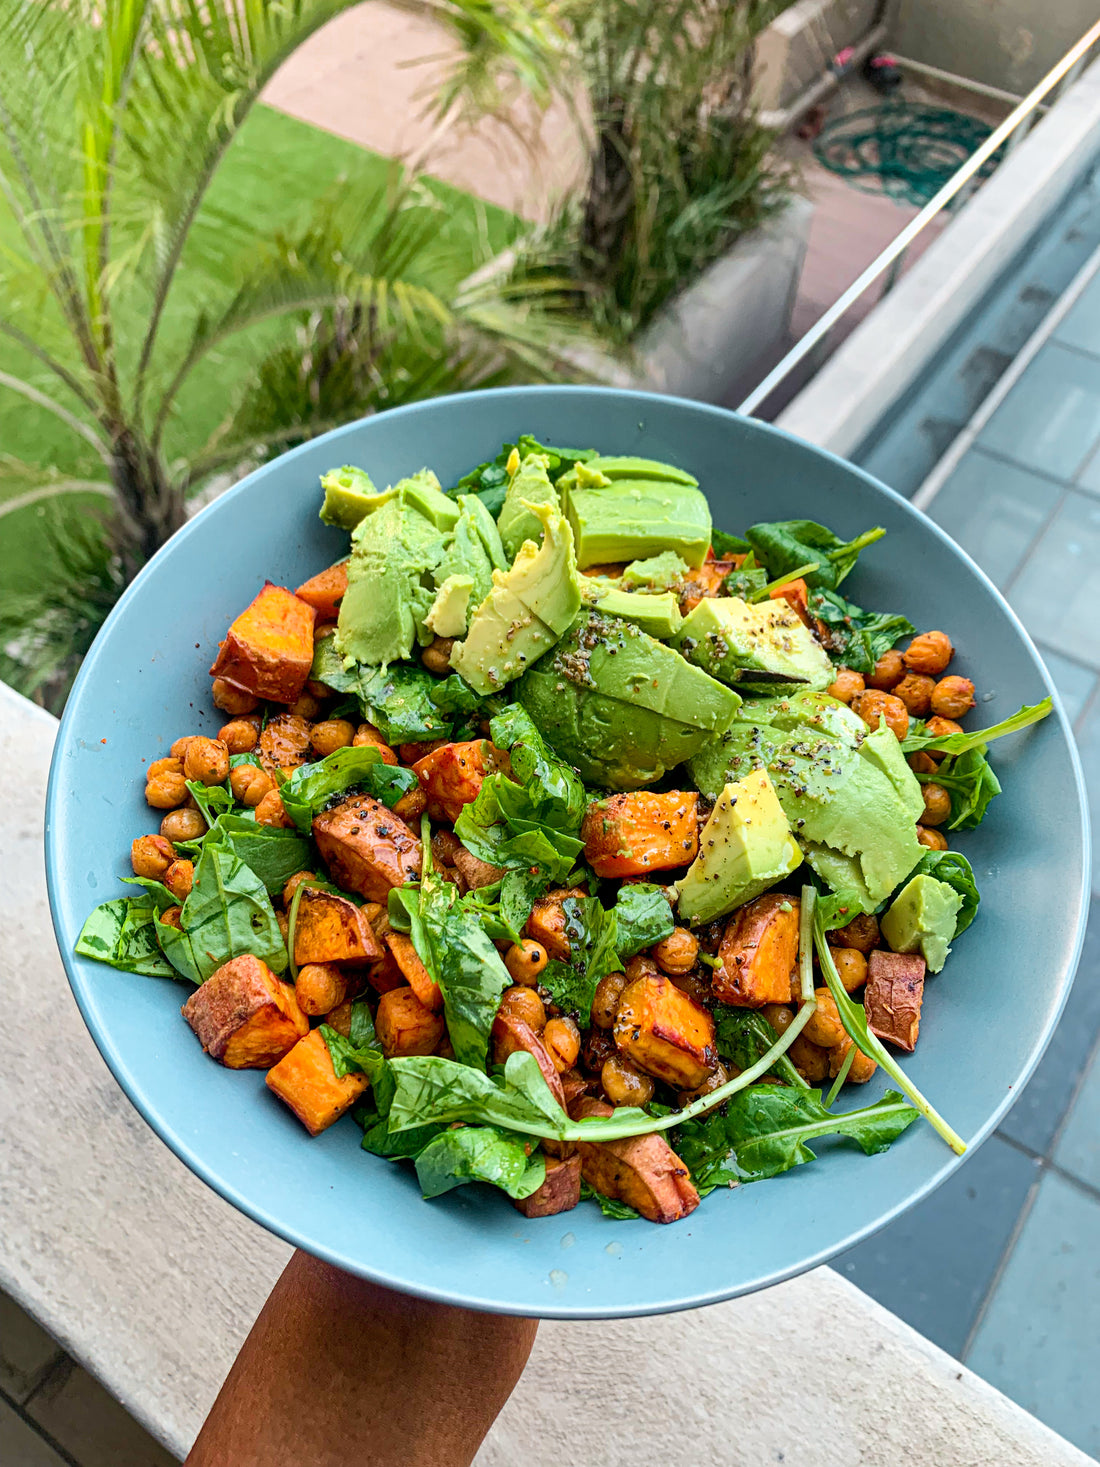 Chickpea and avo salad